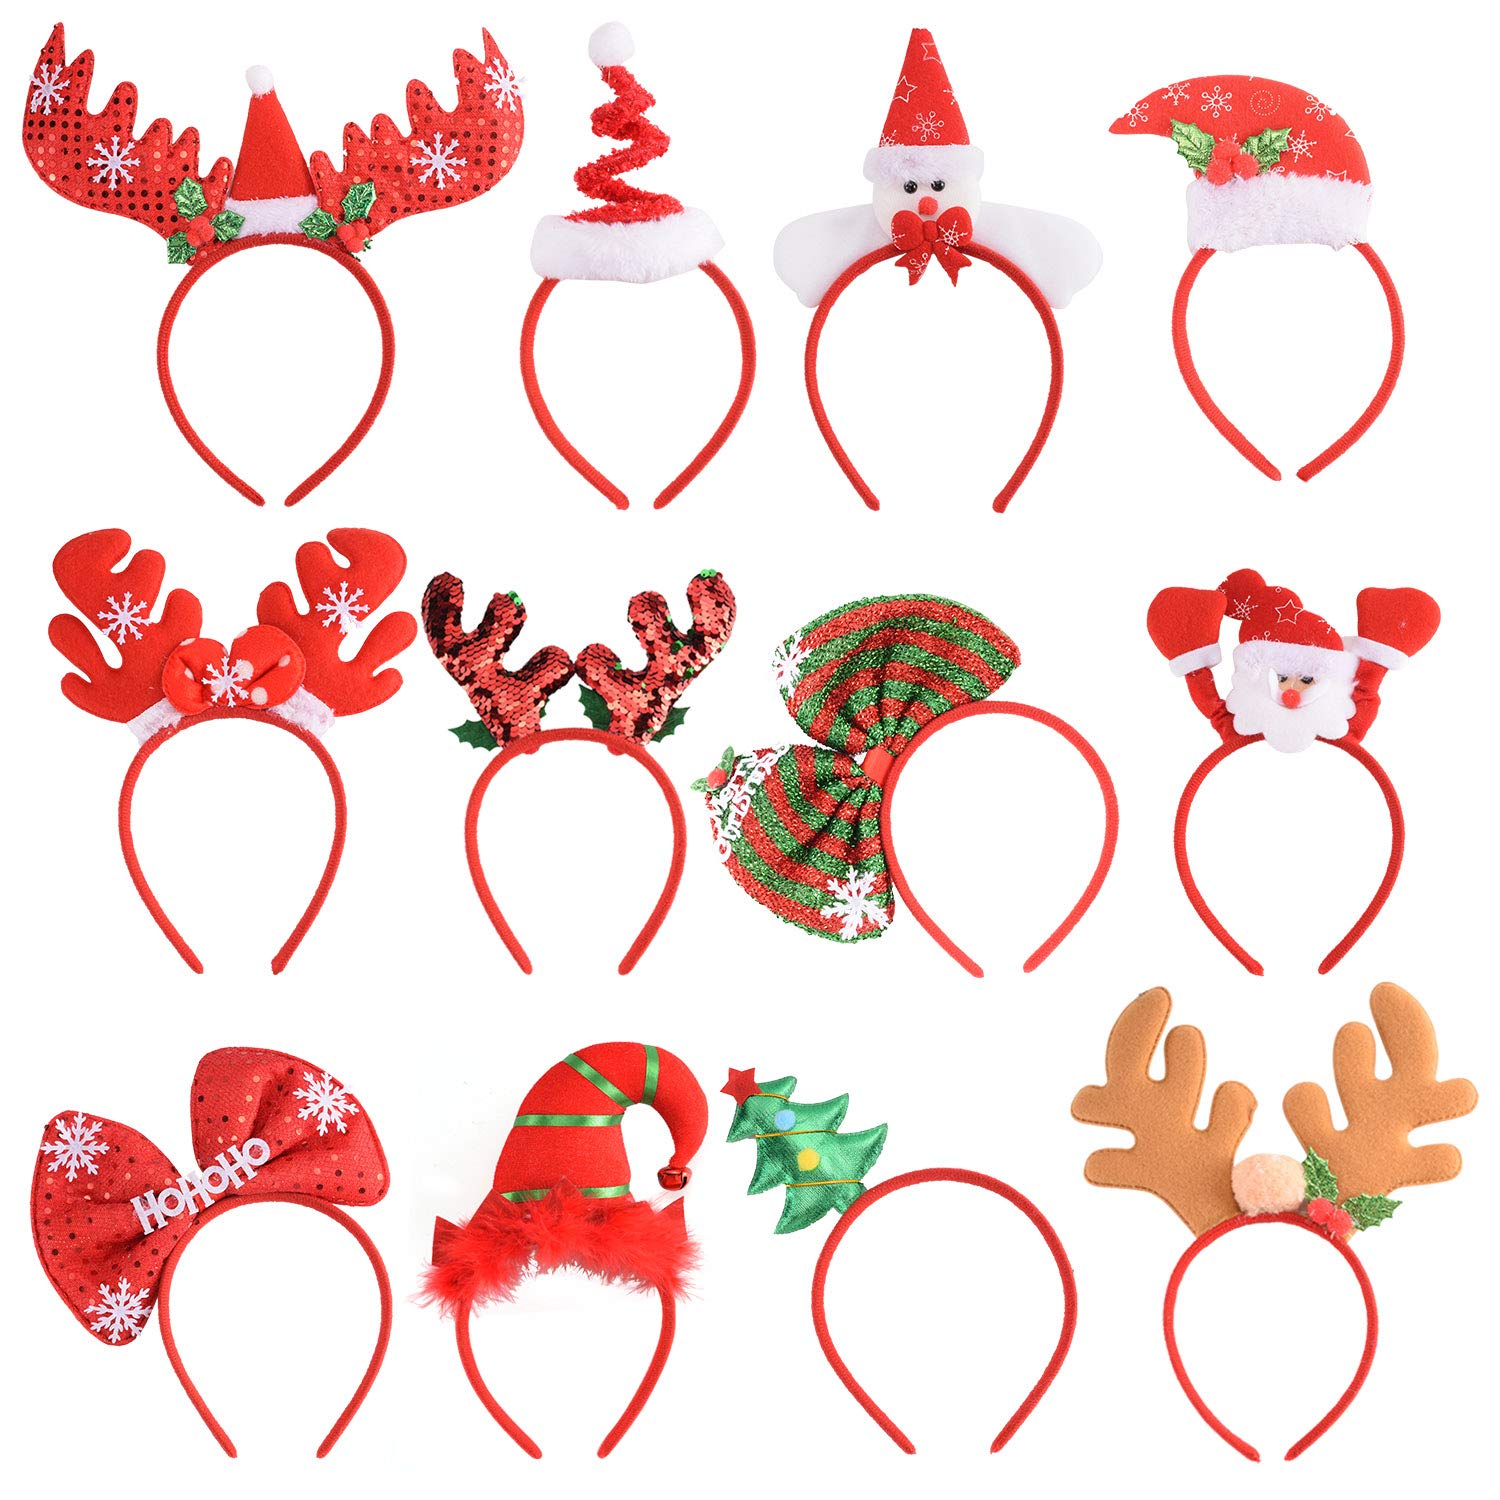 SEVEN STYLE 12 PCS Holiday Headbands,Cute Christmas head hat toppers,Great Fun and Festive for Annual Holiday and Seasons Themes, Christmas Party,Christmas Dinner,photos booth.